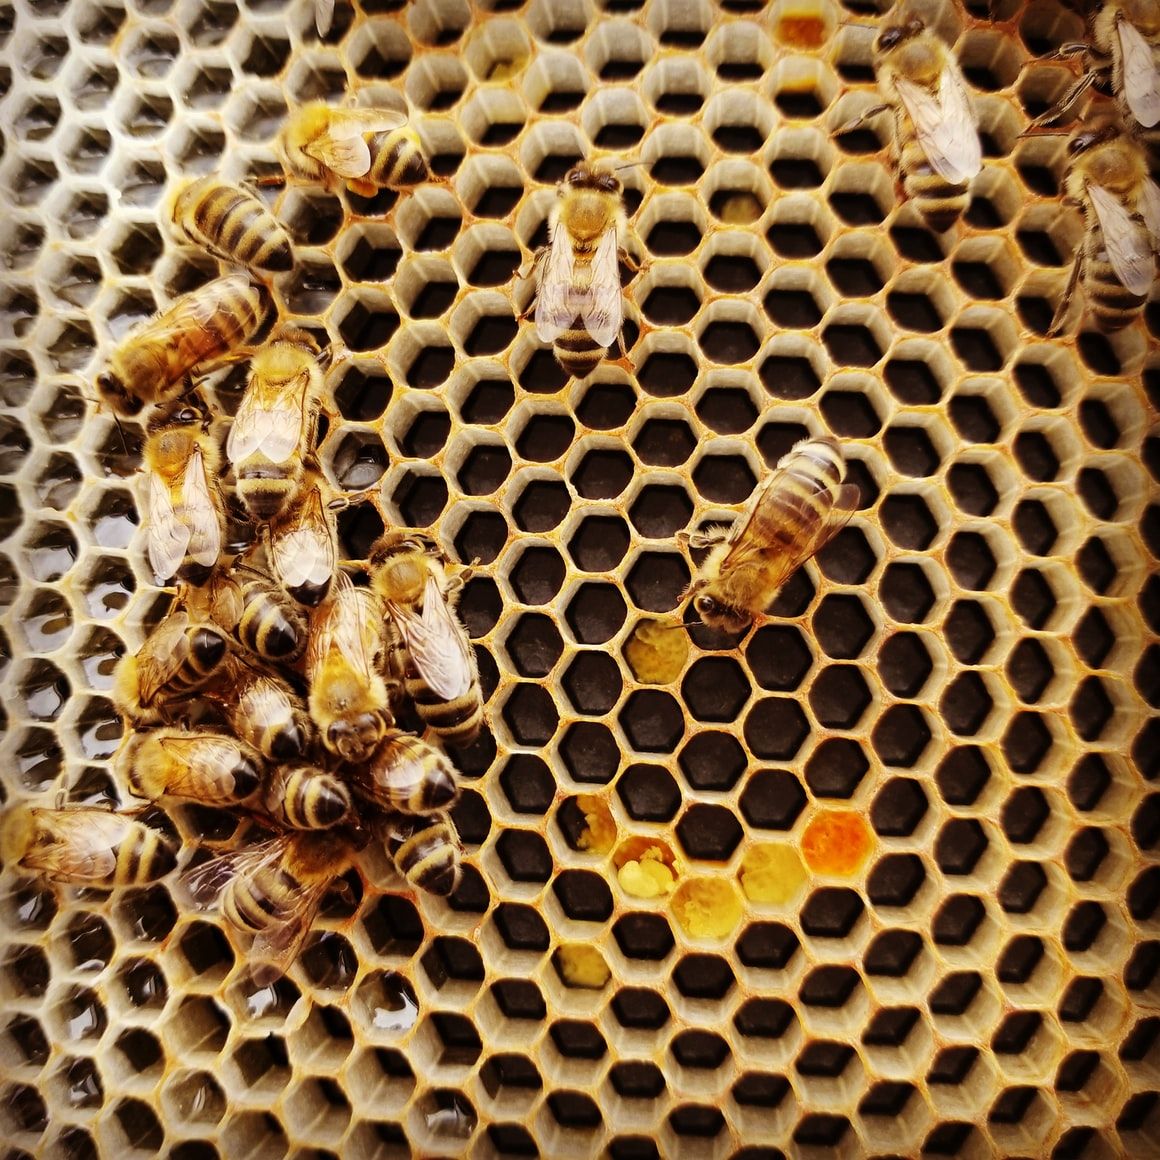 Notes on the Eusocial Nature of Bees